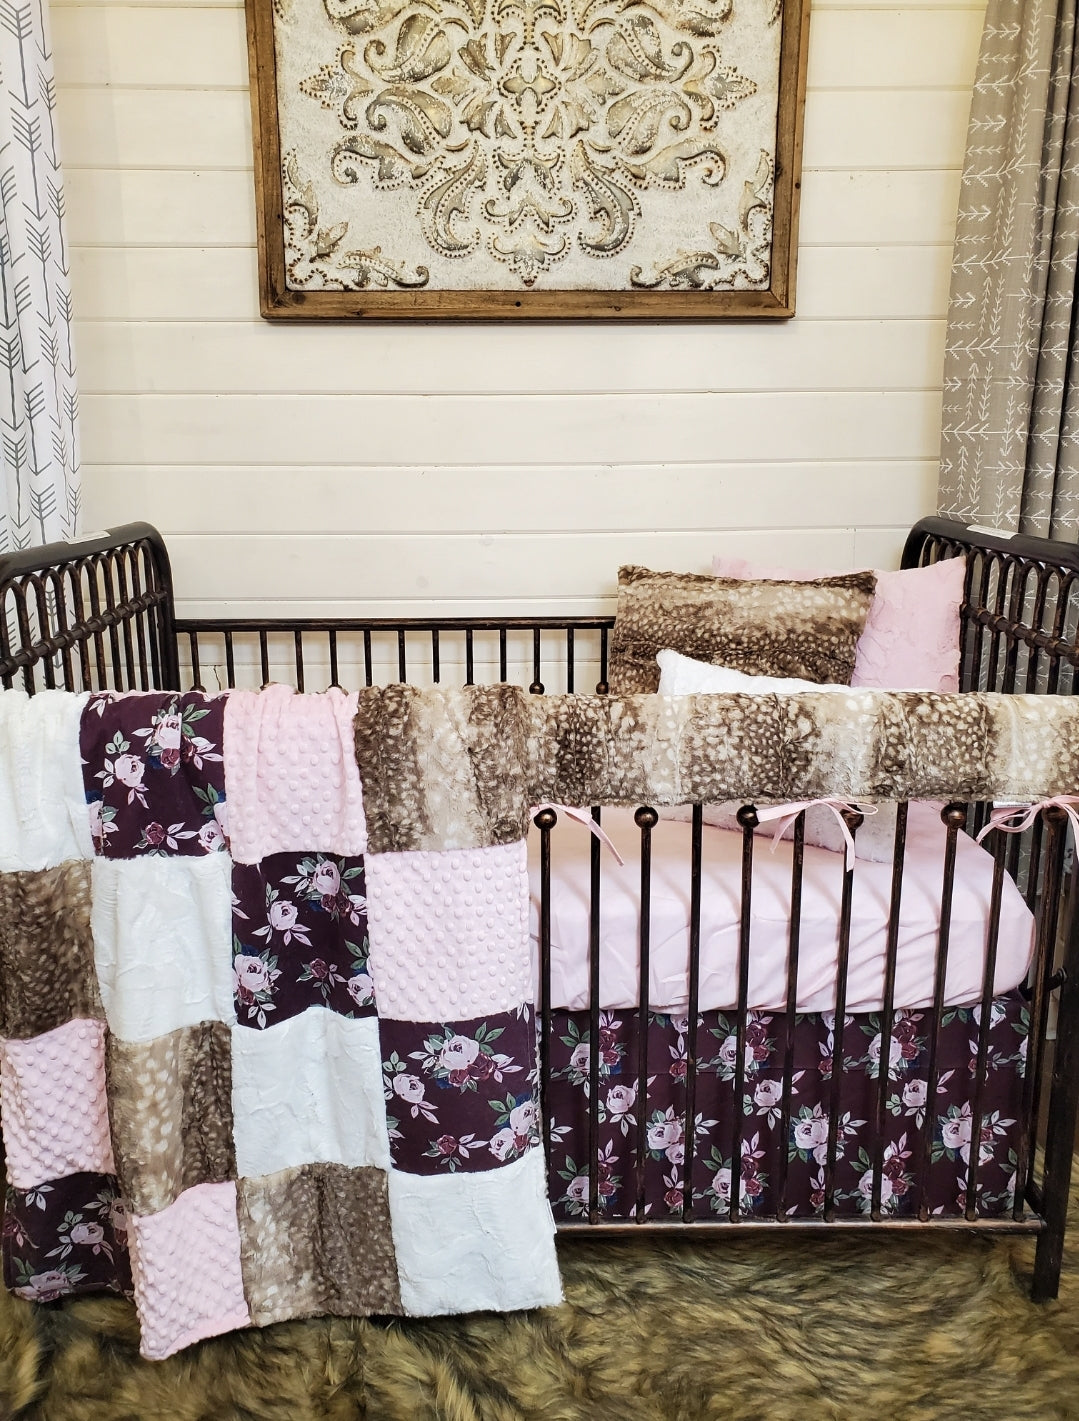 New Release Girl Crib Bedding- Maroon Floral and Fawn Minky Baby Bedding &amp; Nursery Collection - DBC Baby Bedding Co 